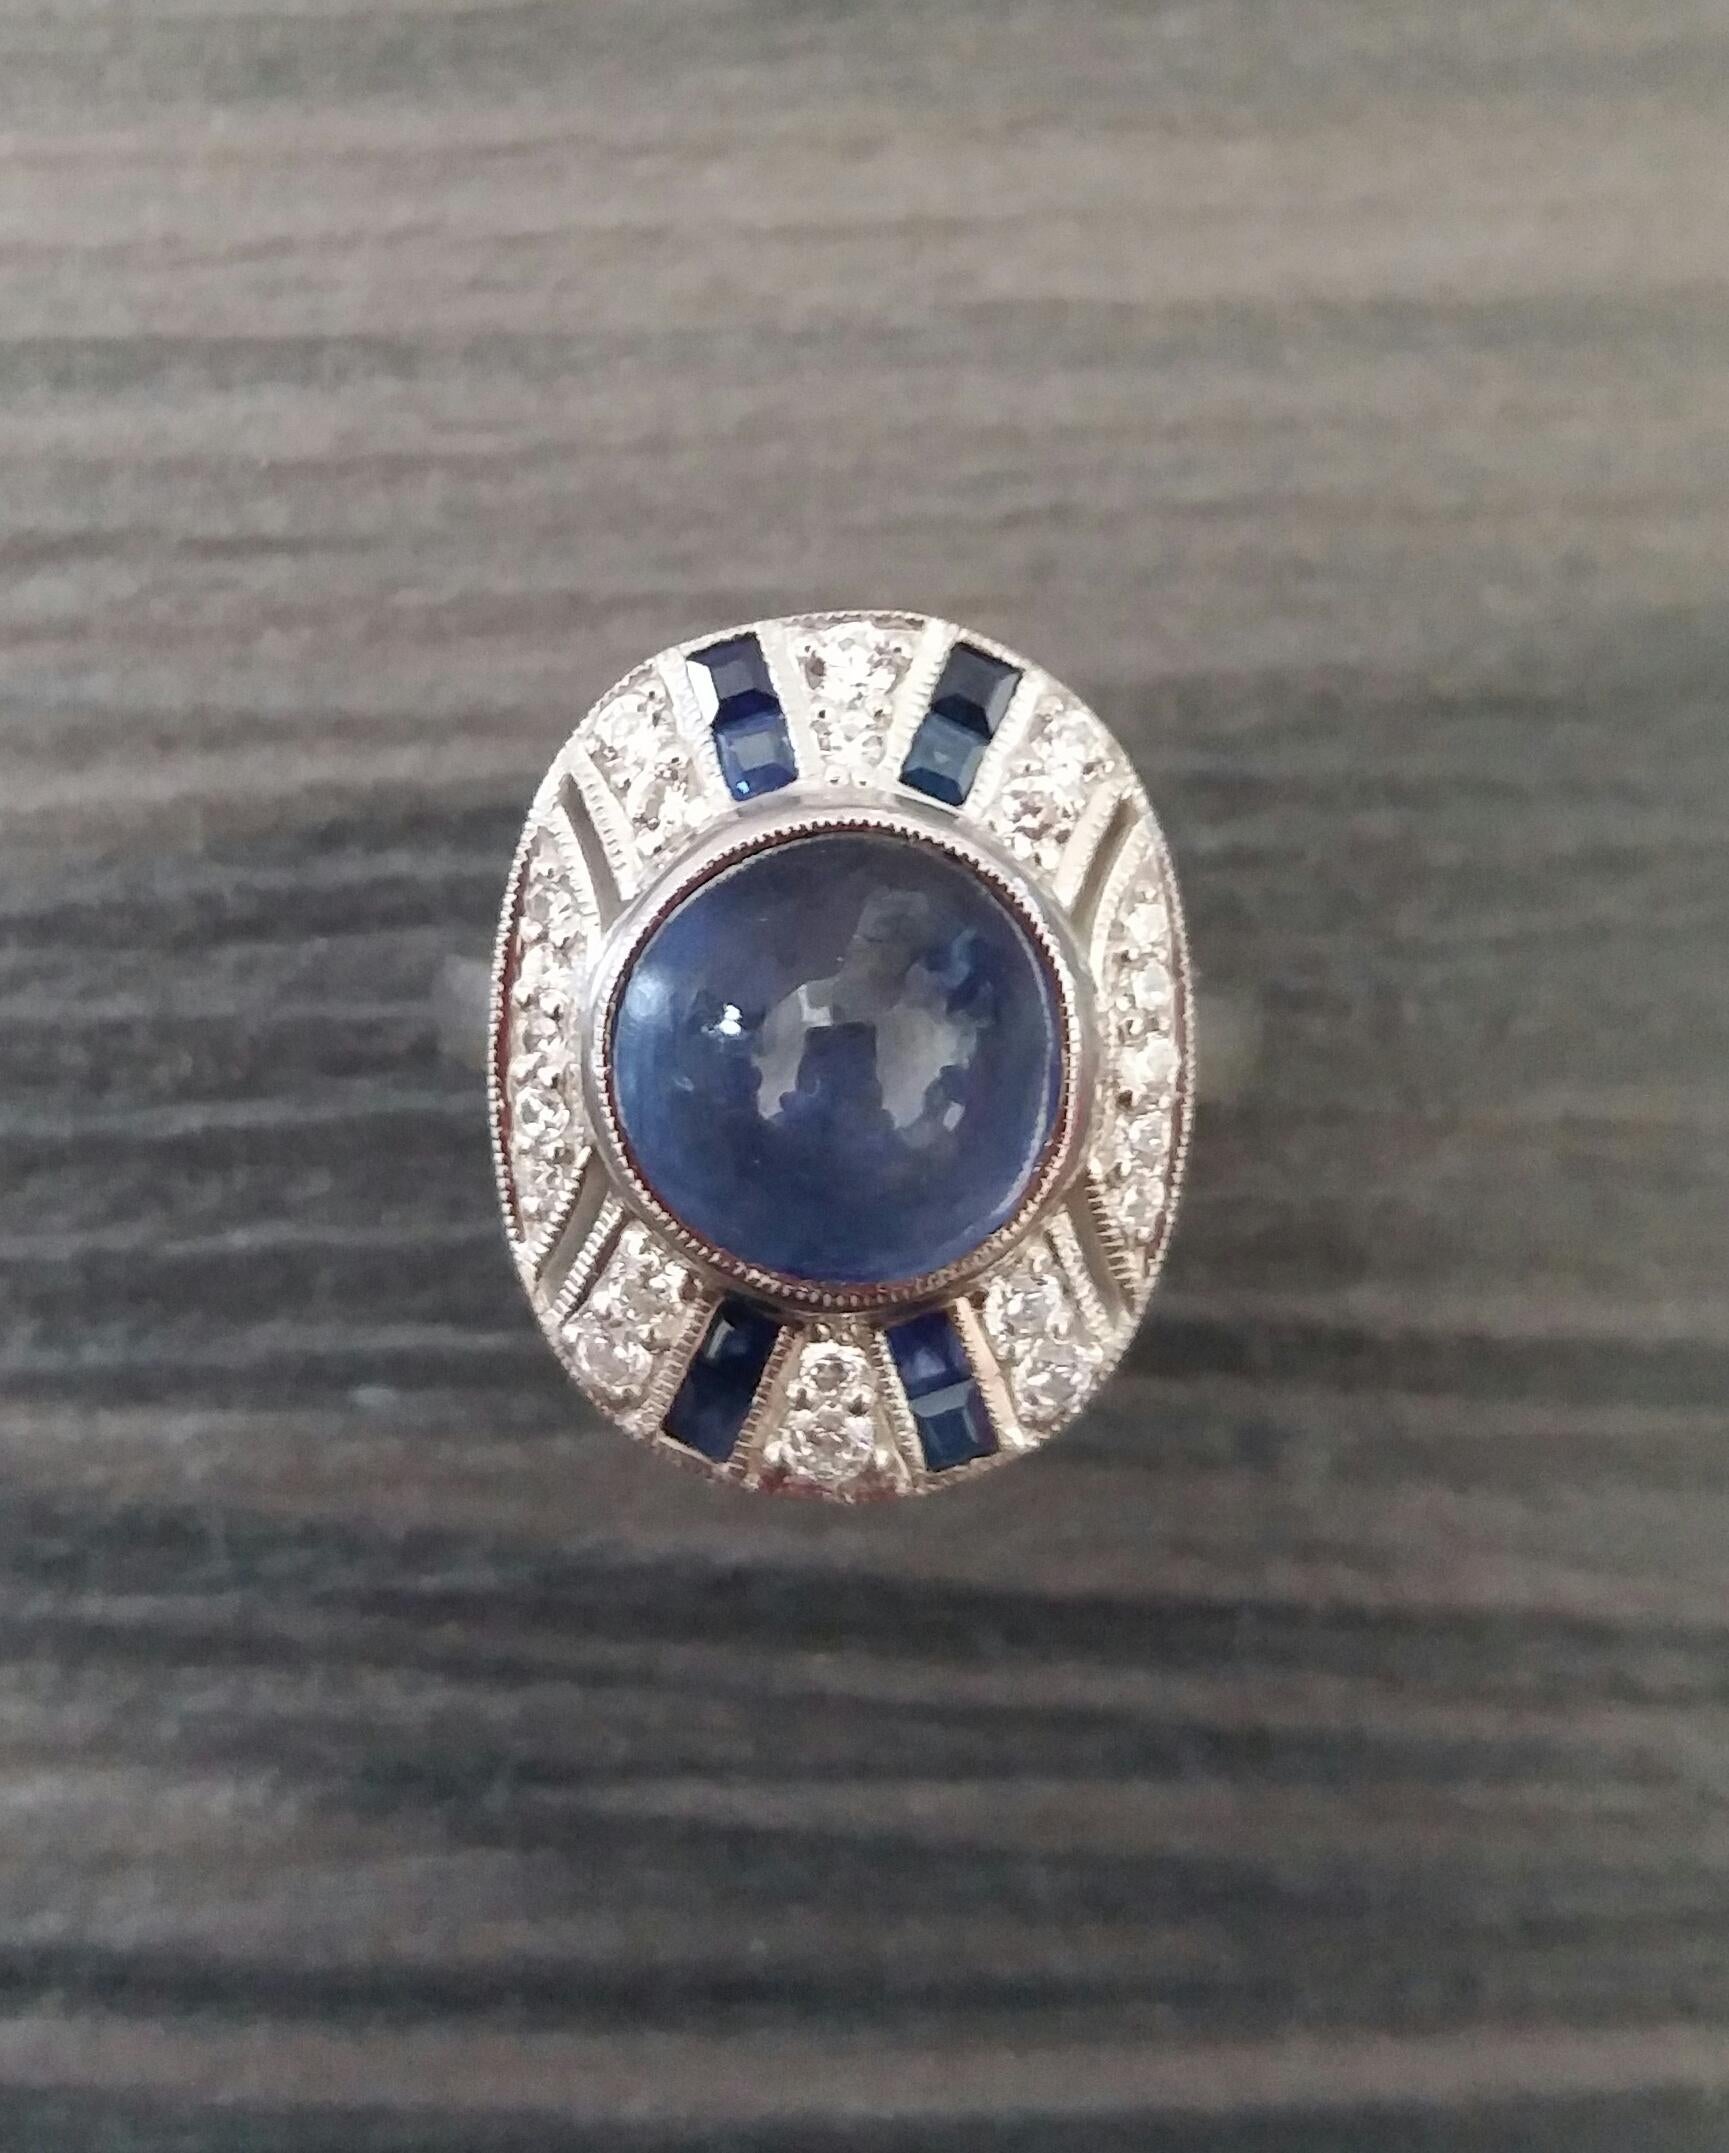 Classy Art Deco 14 White Gold Ring with a 8 Carats Round Blue Sapphire Cabochon in the center 4 small lines of rectangular cut Blue Sapphires with 